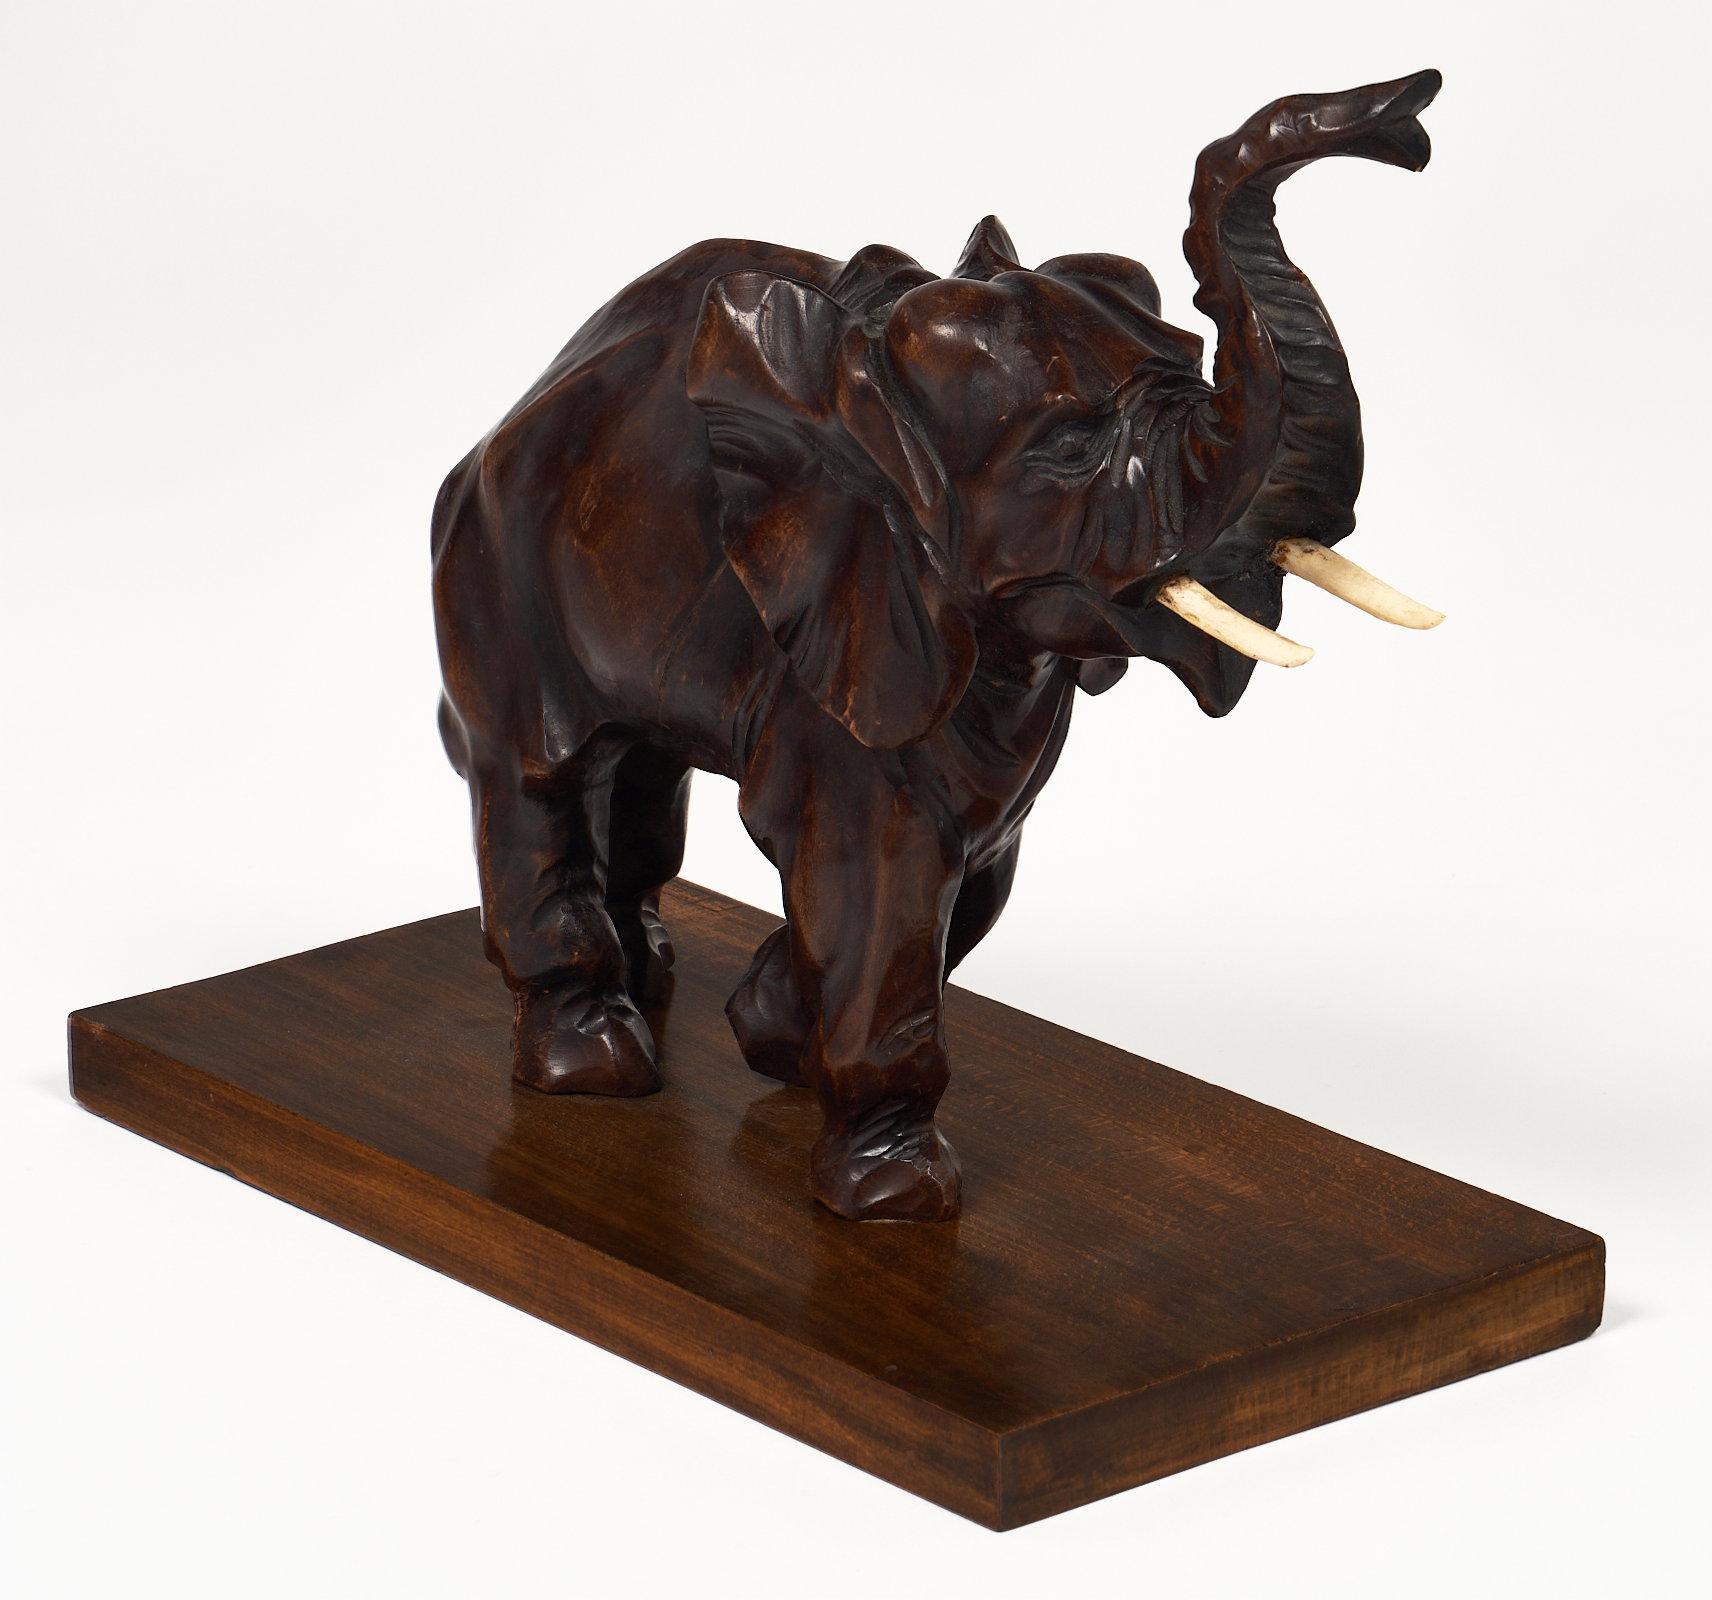 An Art Deco period elephant sculpture made of wood and detailing the elephant walking. We couldn’t resist the dynamic quality of the piece and the highly detailed form of the elephant. This piece has a wonderful quality and original patina.